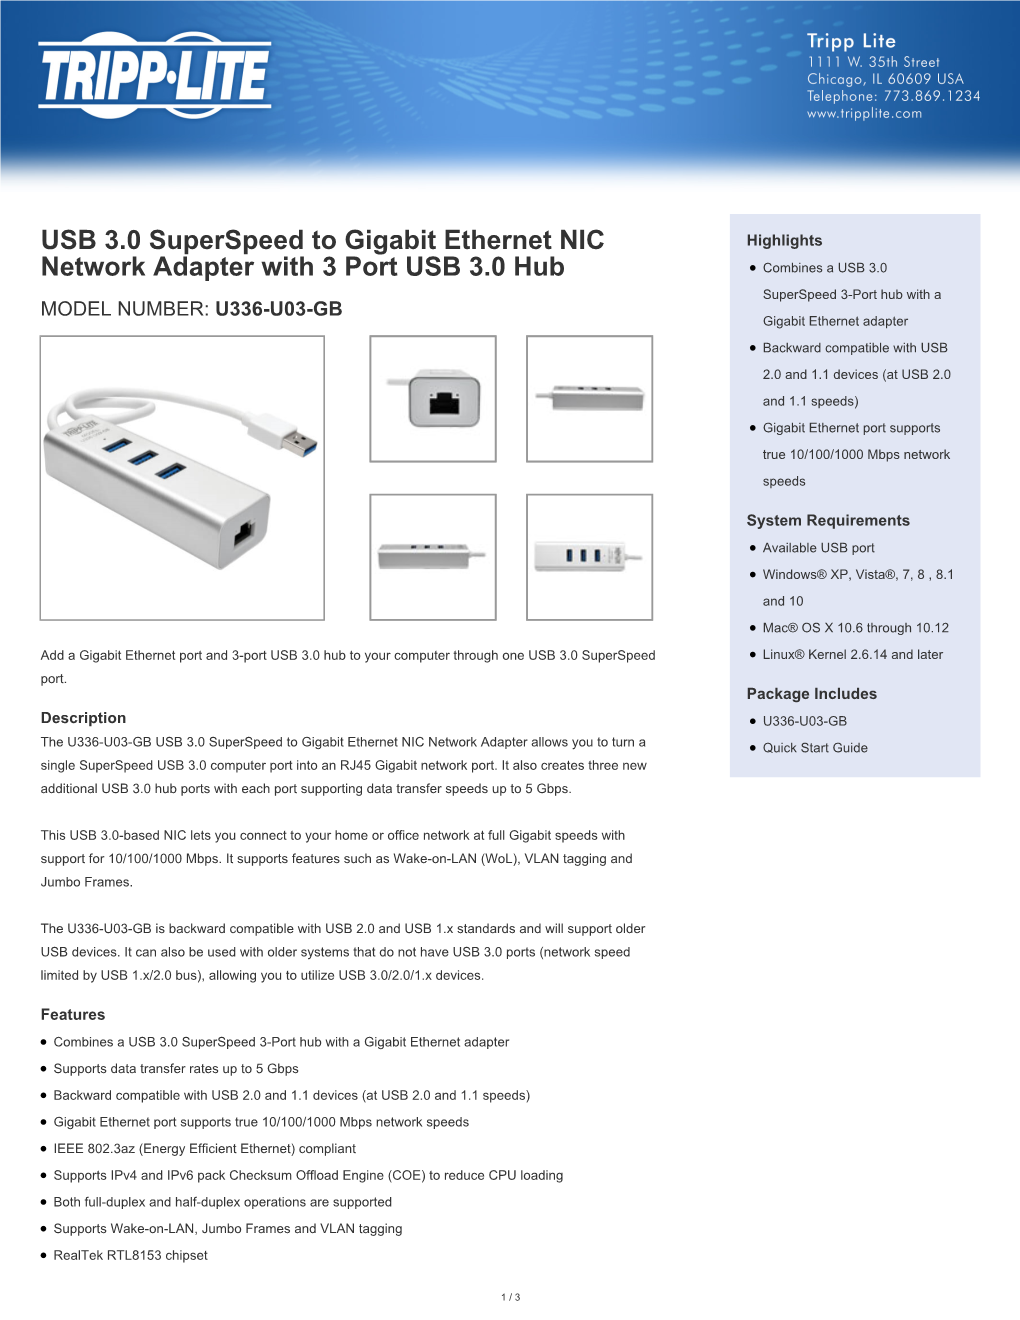 USB 3.0 Superspeed to Gigabit Ethernet NIC Network Adapter With